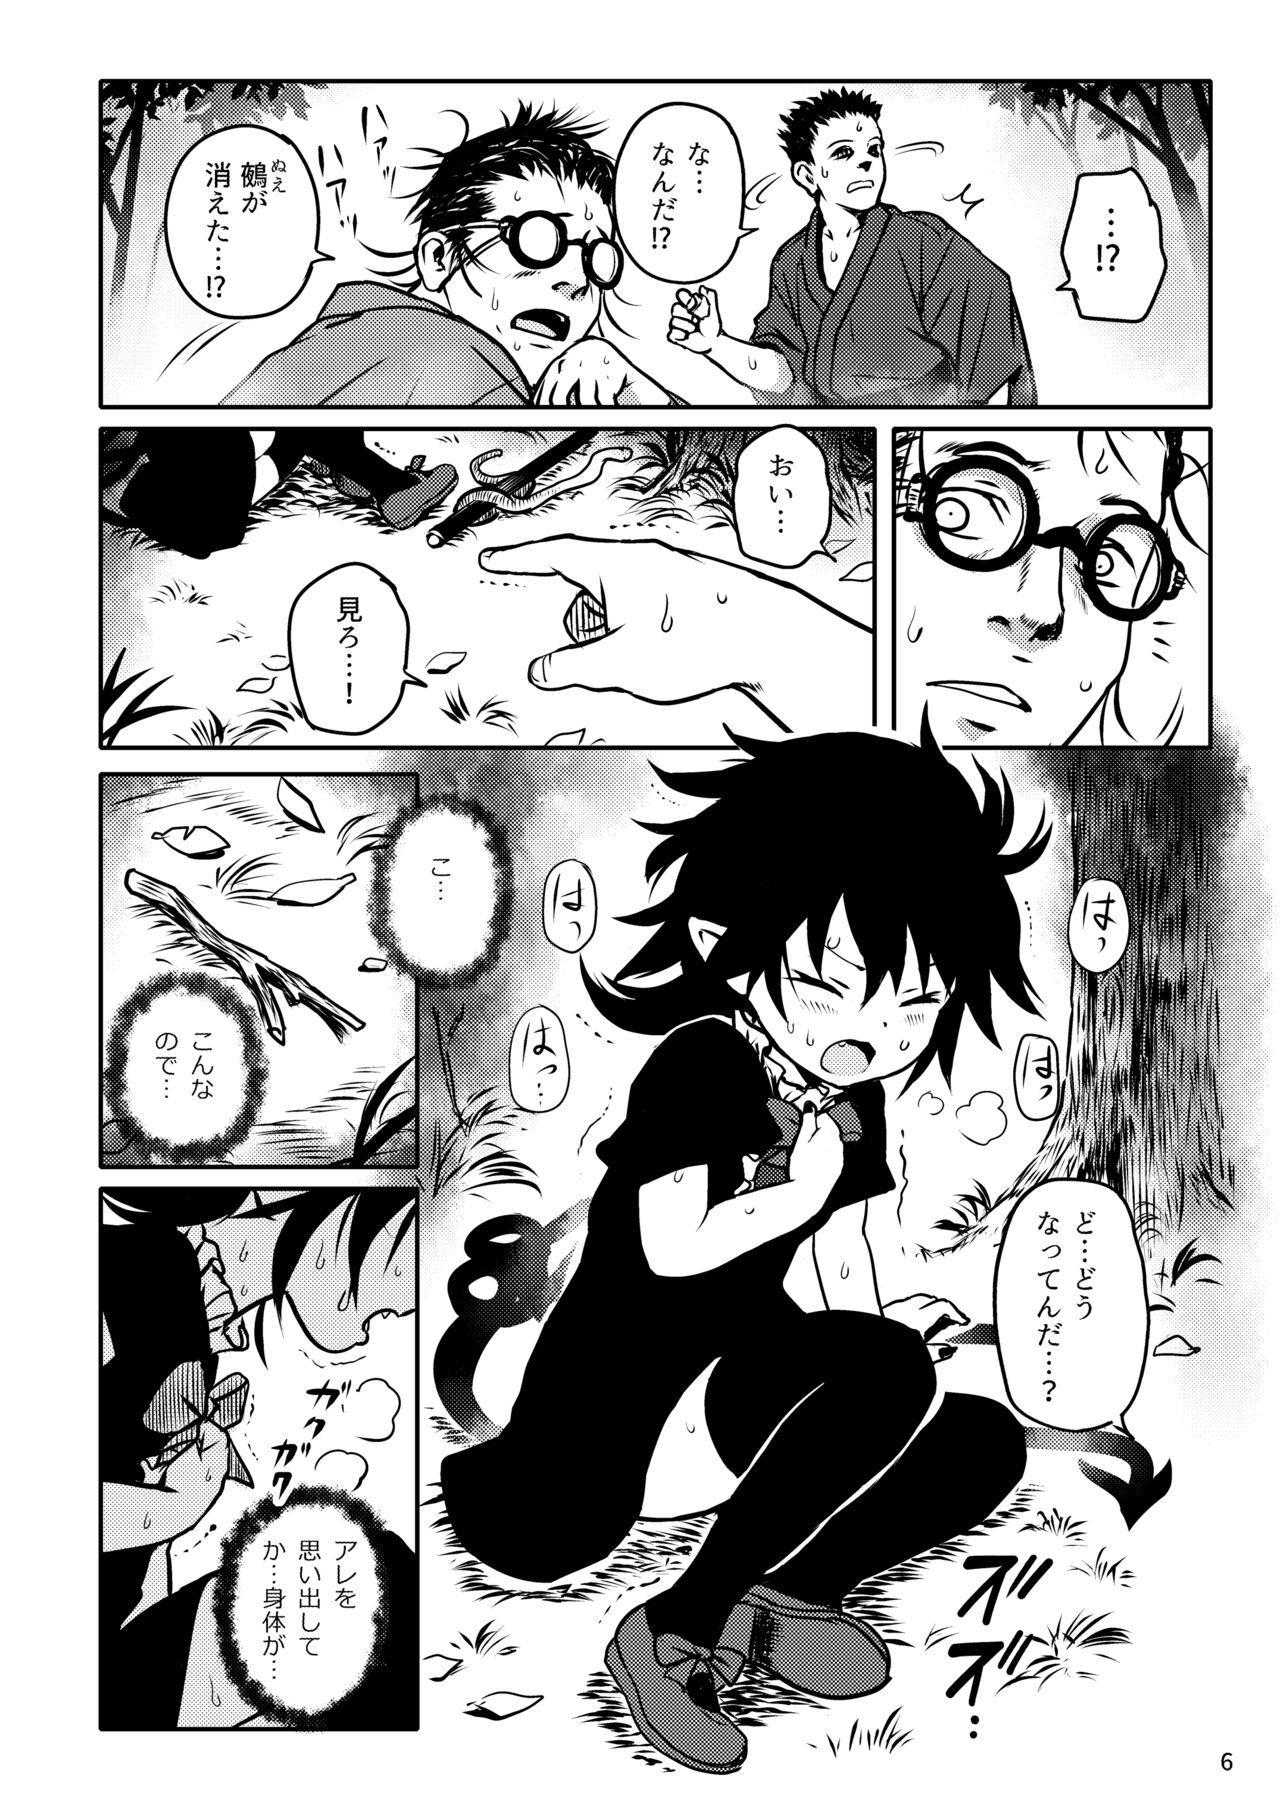 Best Blowjobs Ever Trauma! Nue-chan! - Touhou project Glamcore - Page 6